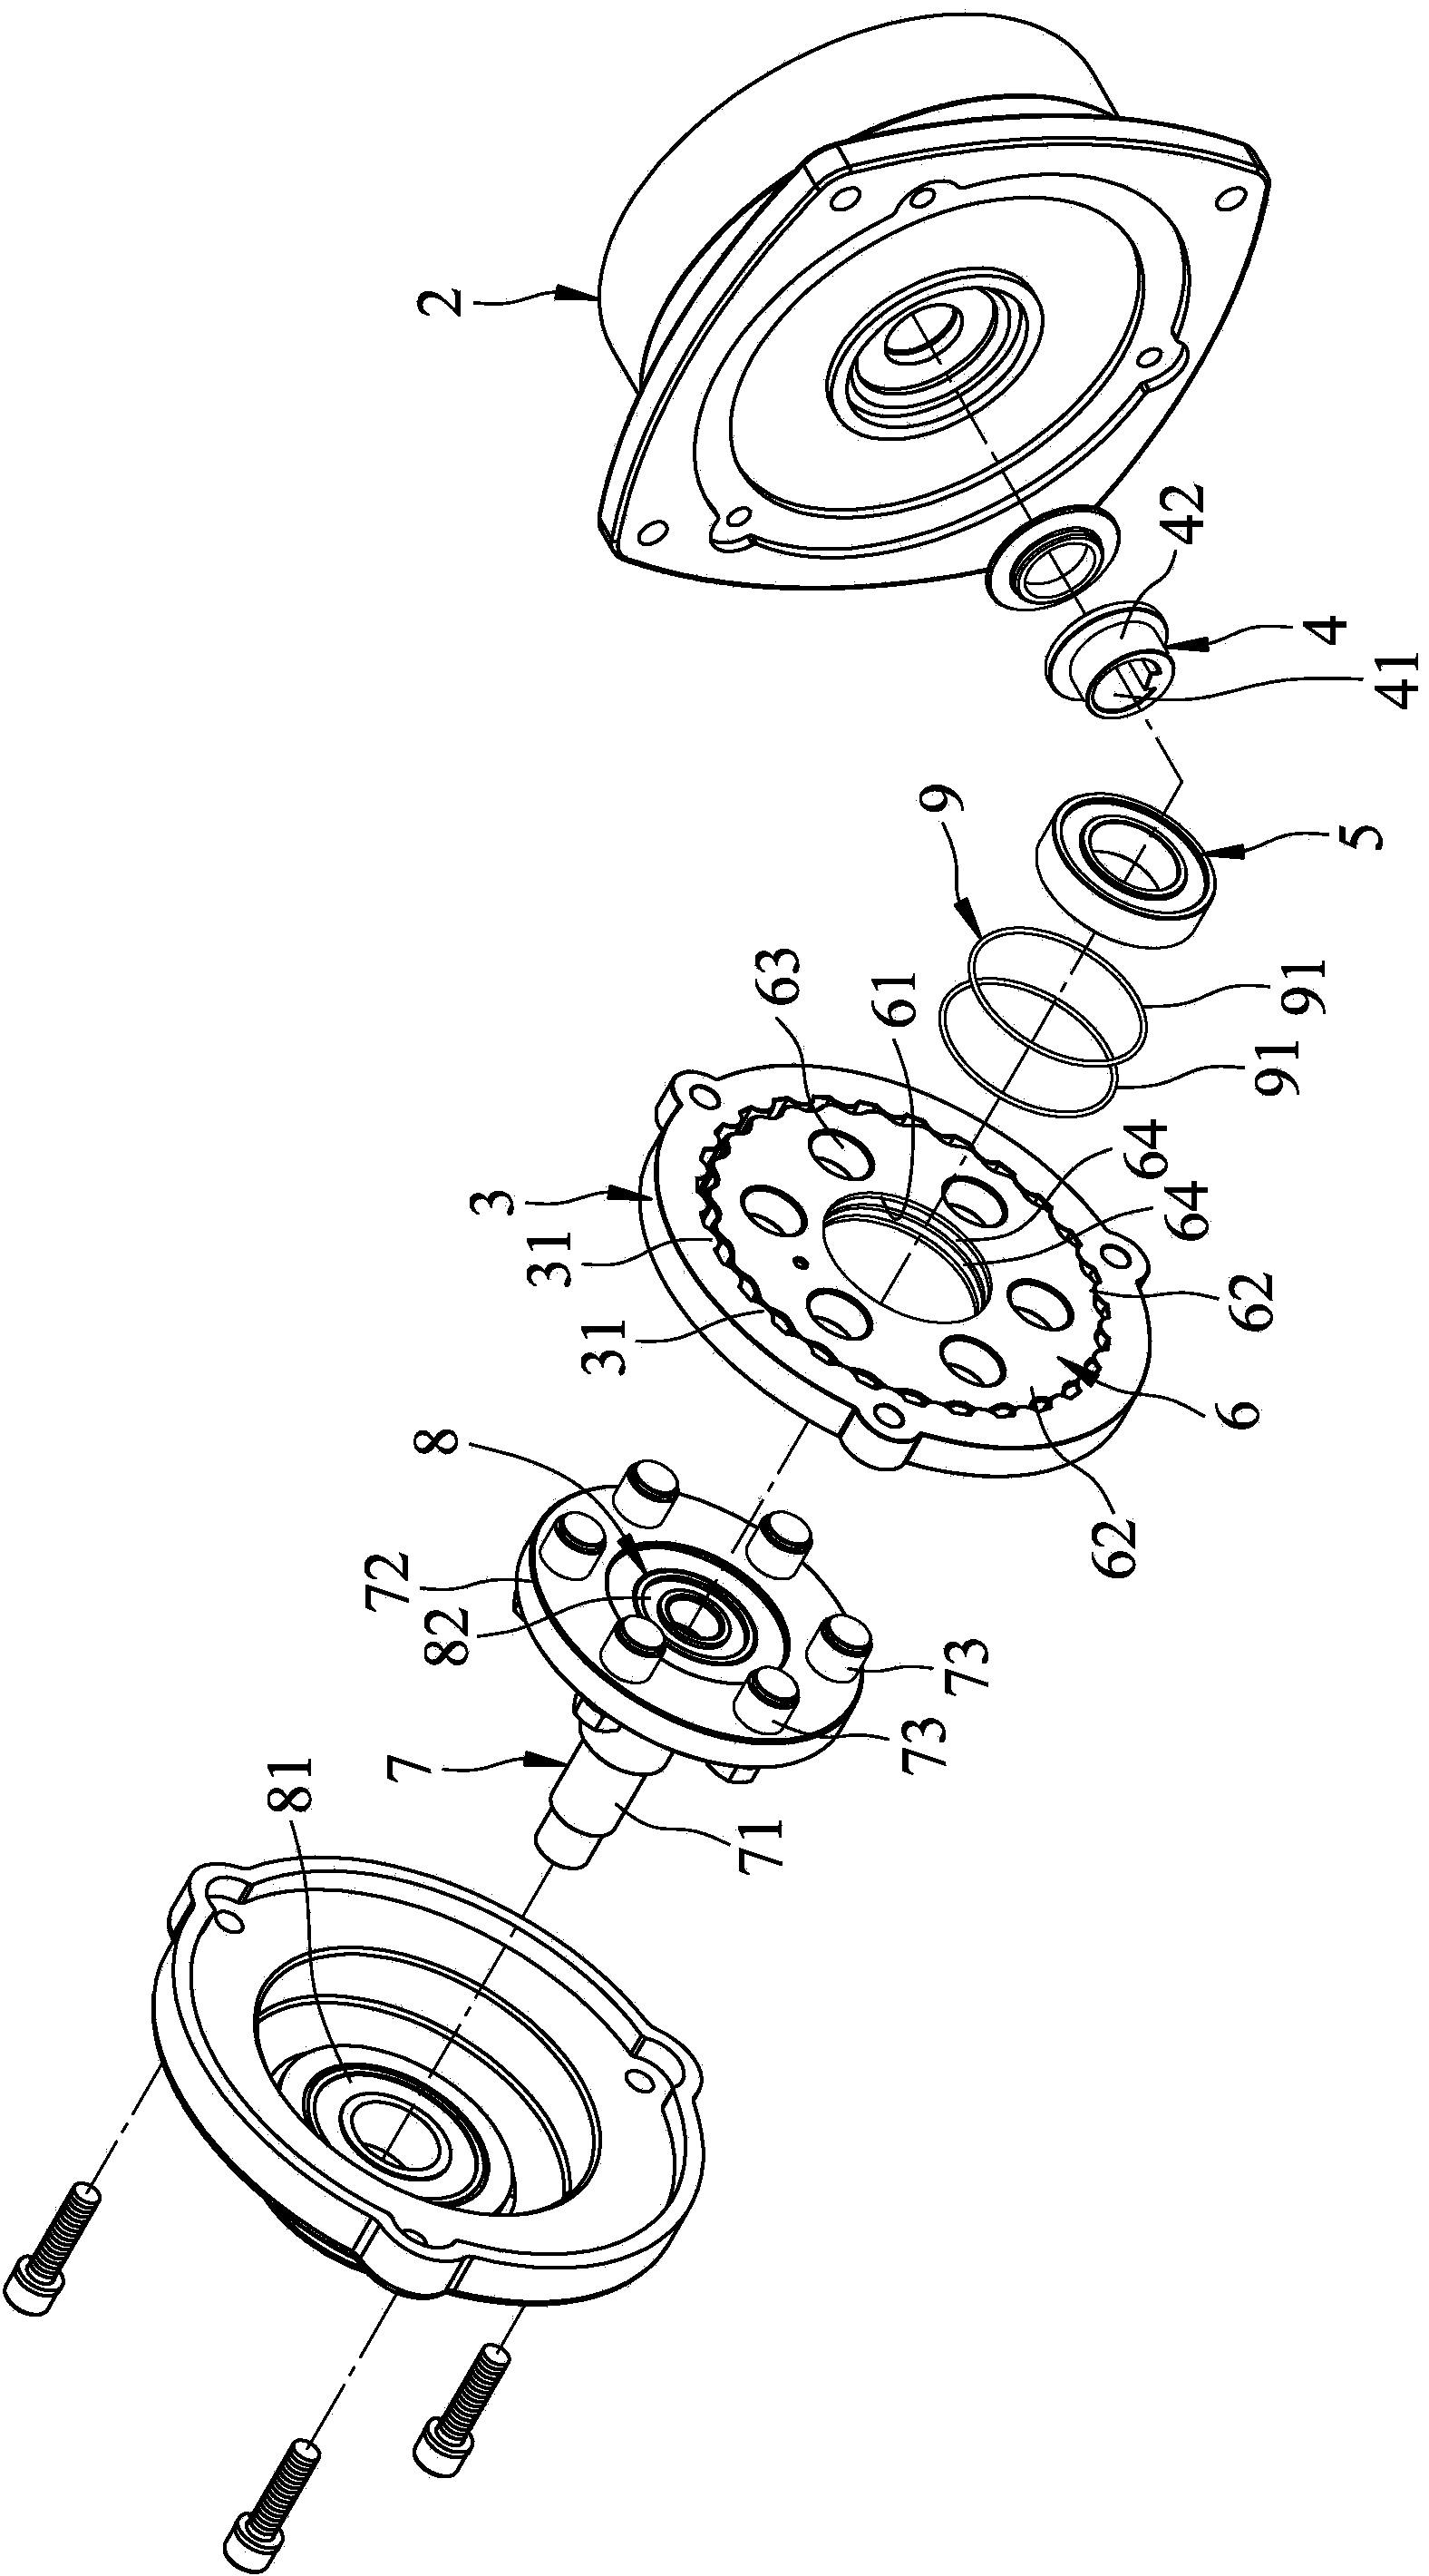 Few-tooth-difference speed reducer capable of reducing noise and wear